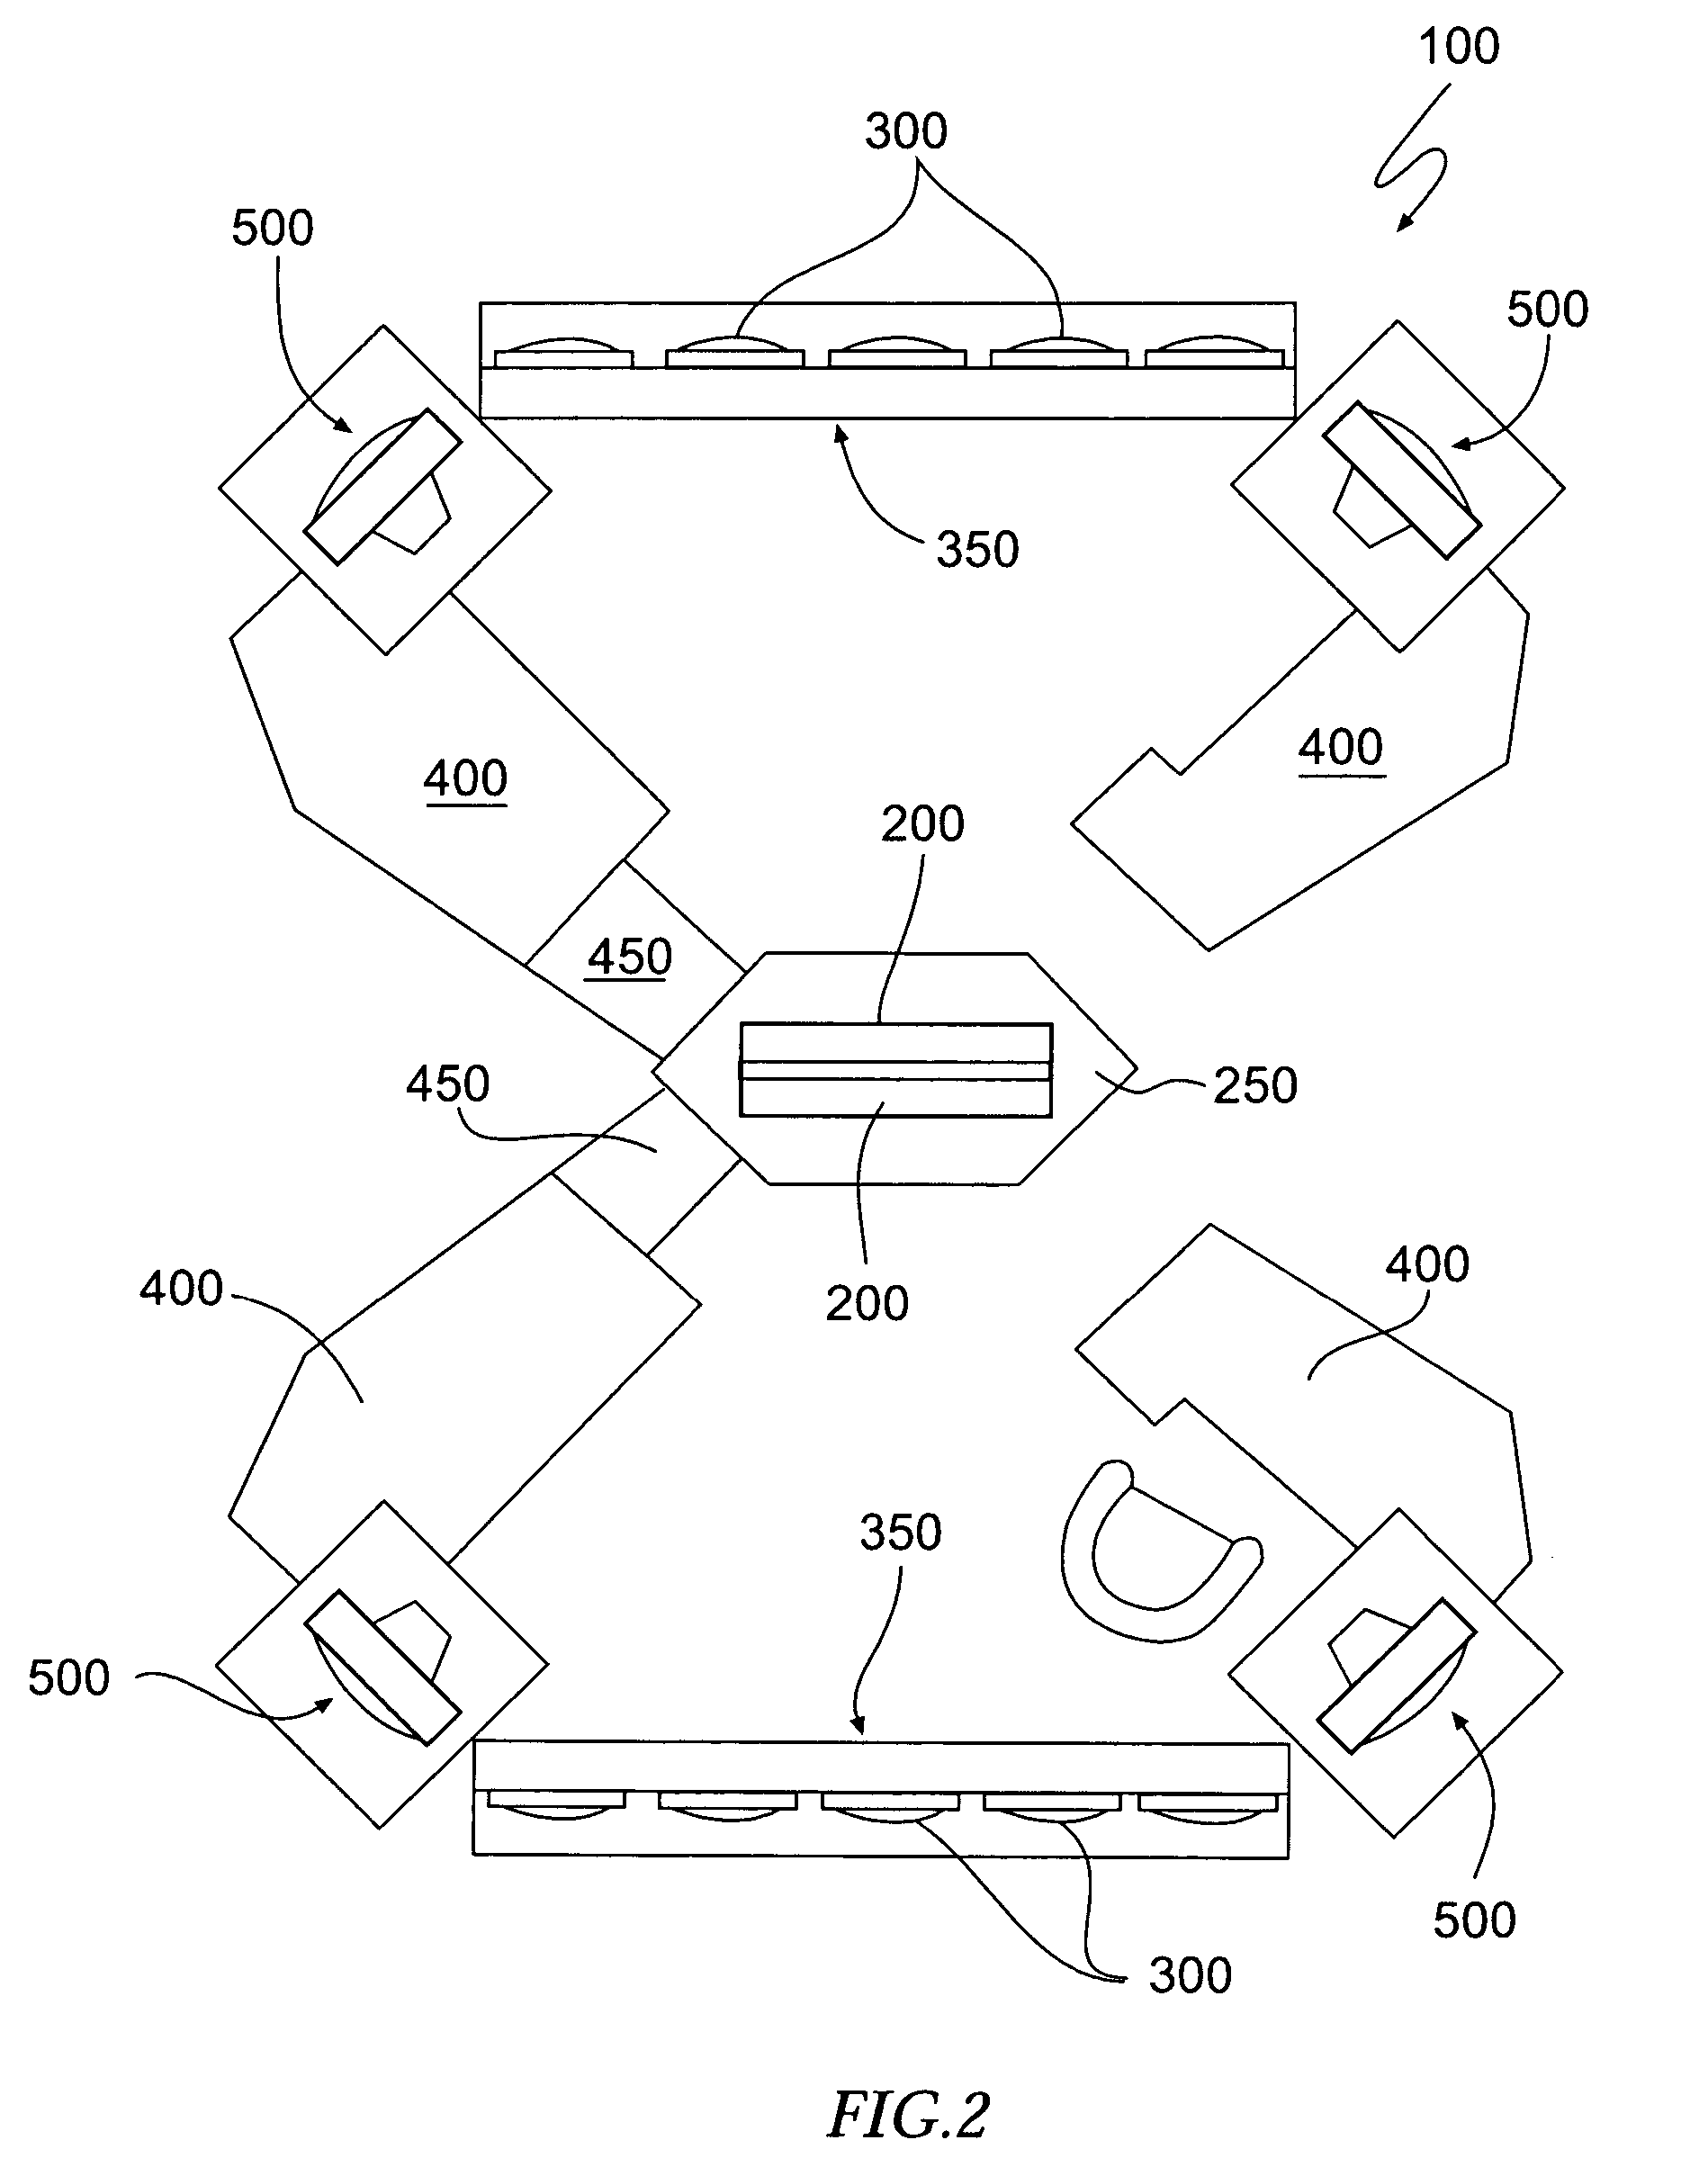 Presentation system and associated method